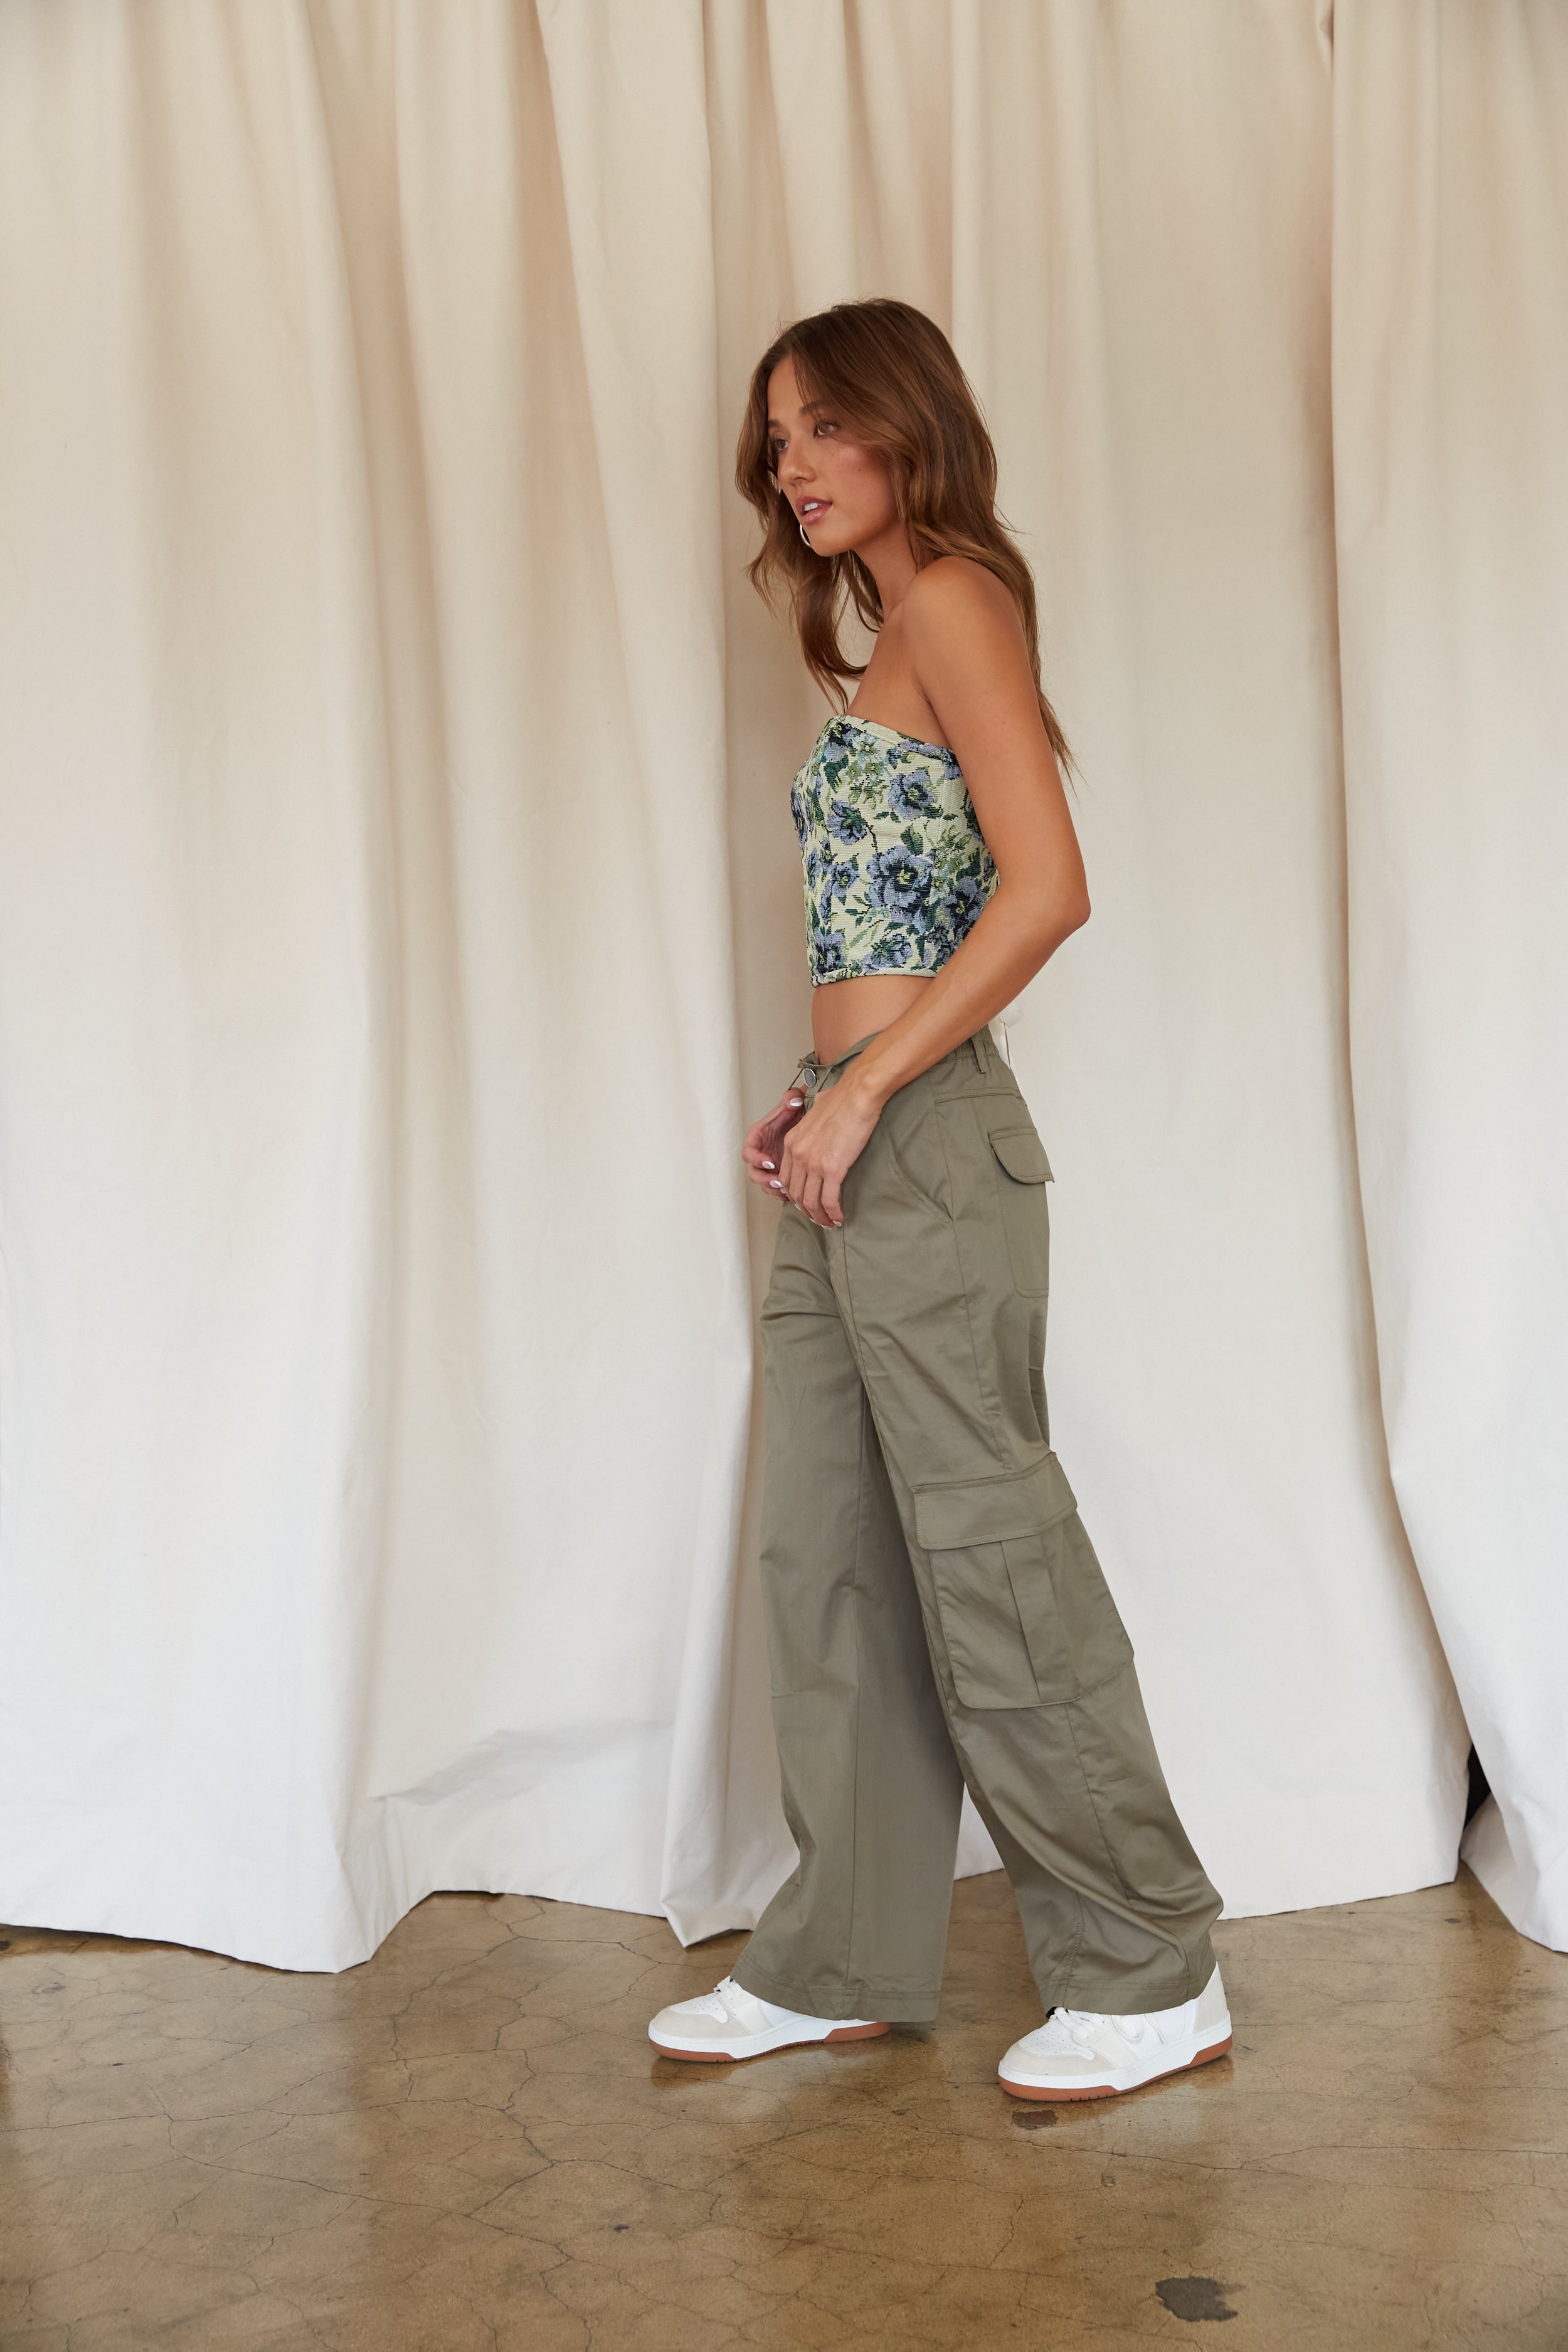 How to style cargo pants: 7 great ways to wear the look | Woman & Home